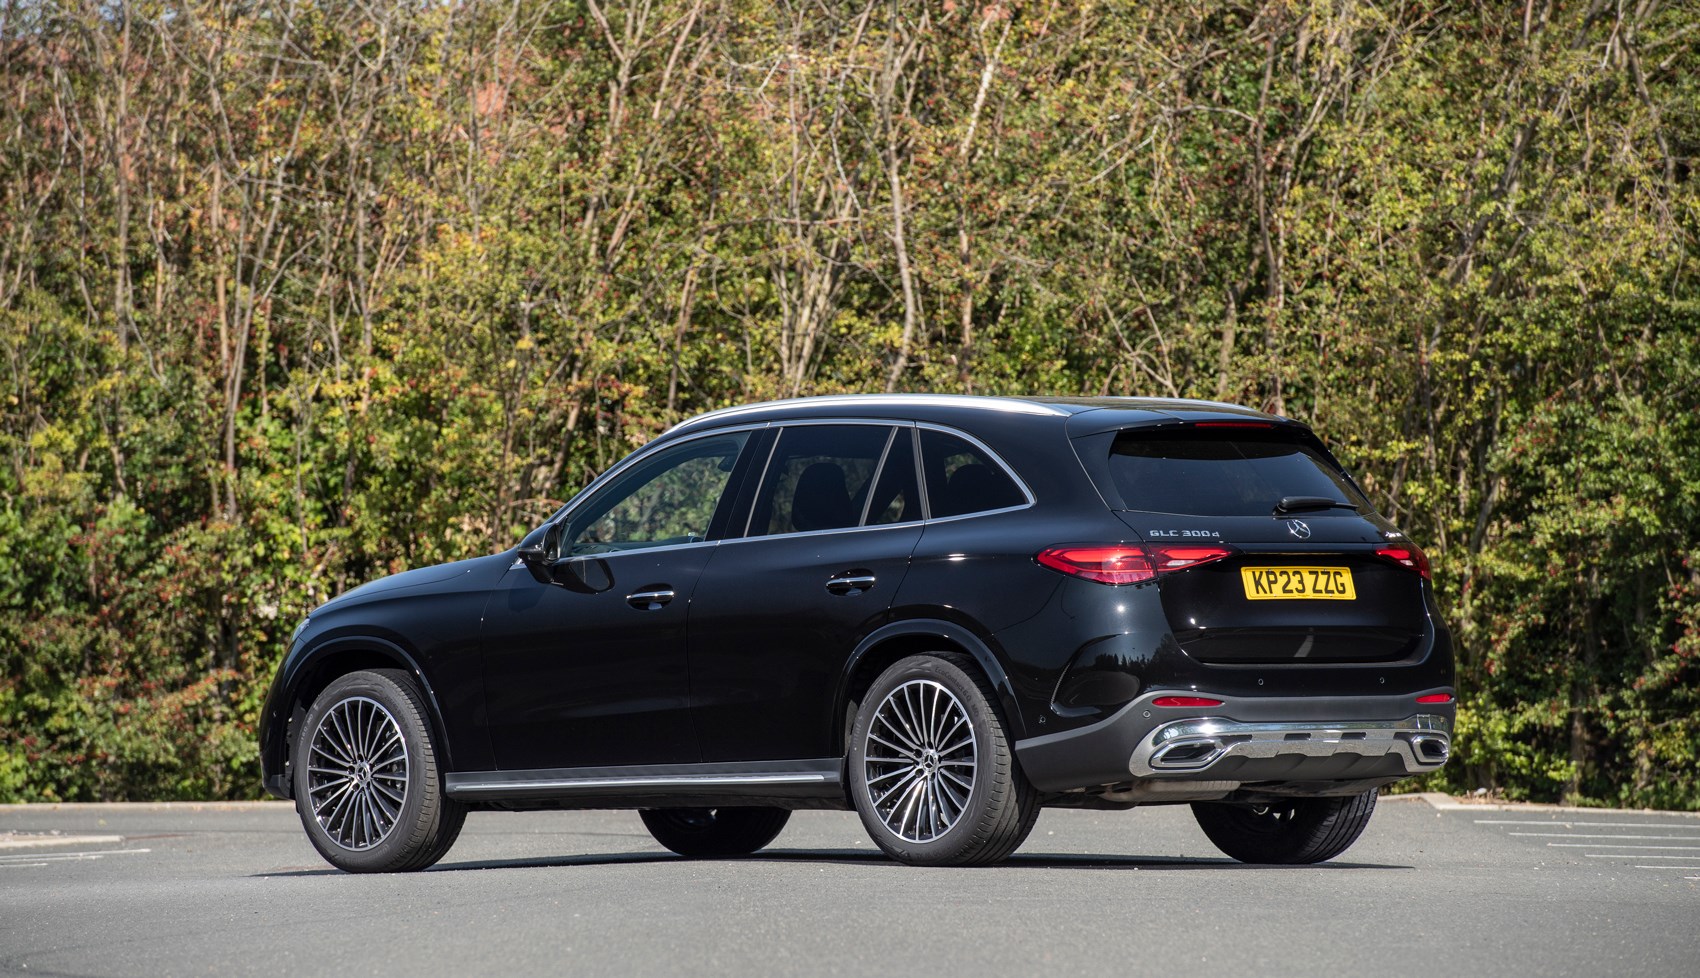 2023 Mercedes-Benz GLC 300 4Matic Hybrid Review: Fuel-Sipping